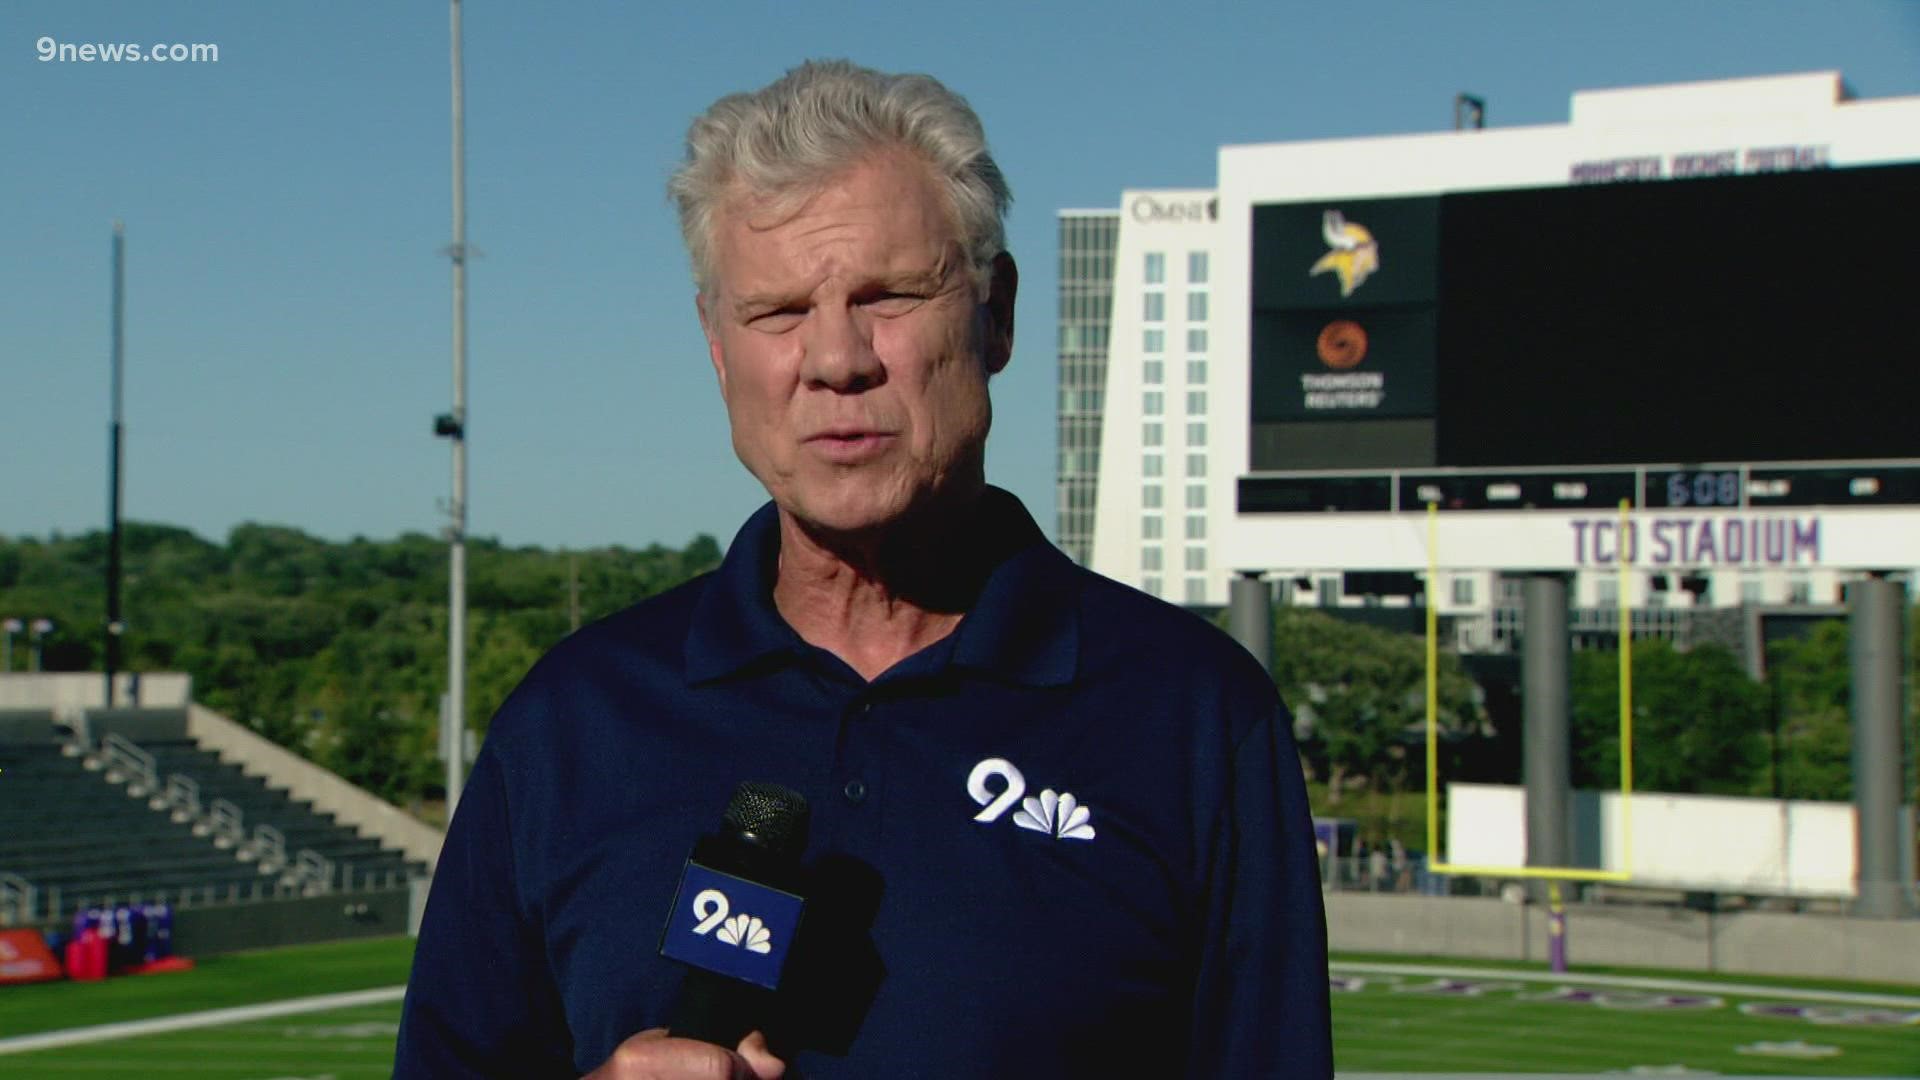 Mike Klis provides the latest on the Denver Broncos training camp from Minnesota.